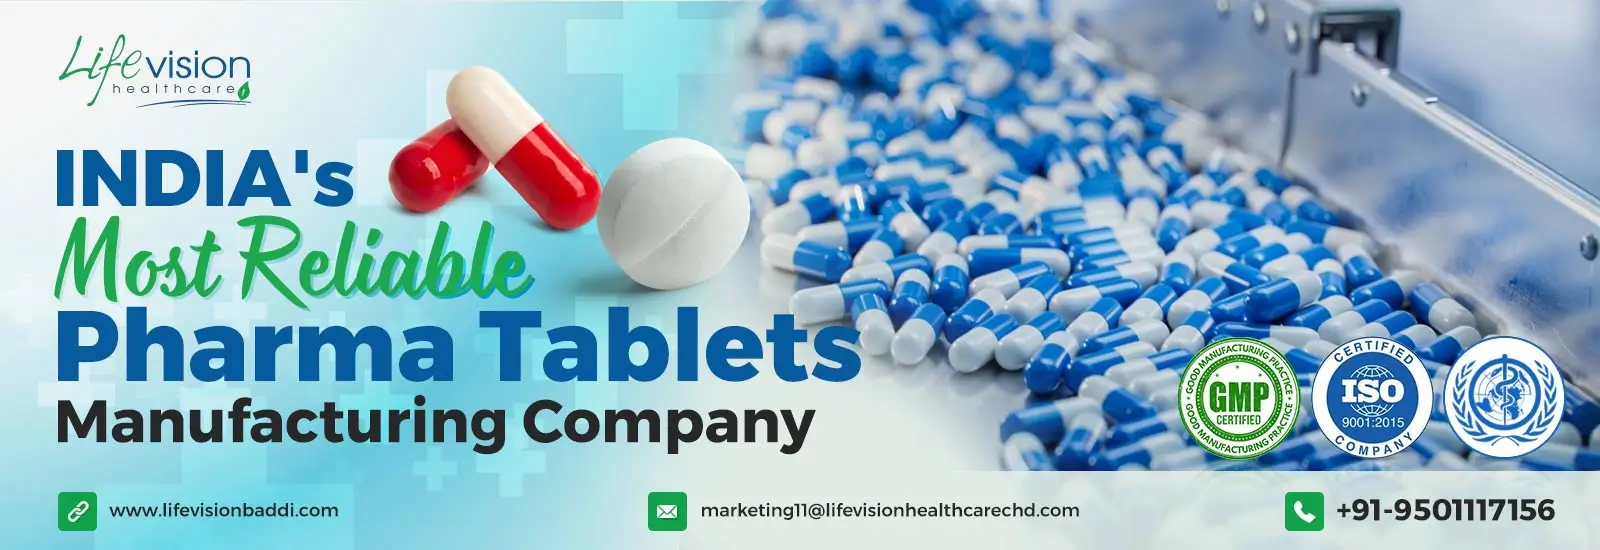 pharma tablets manufacturers in India